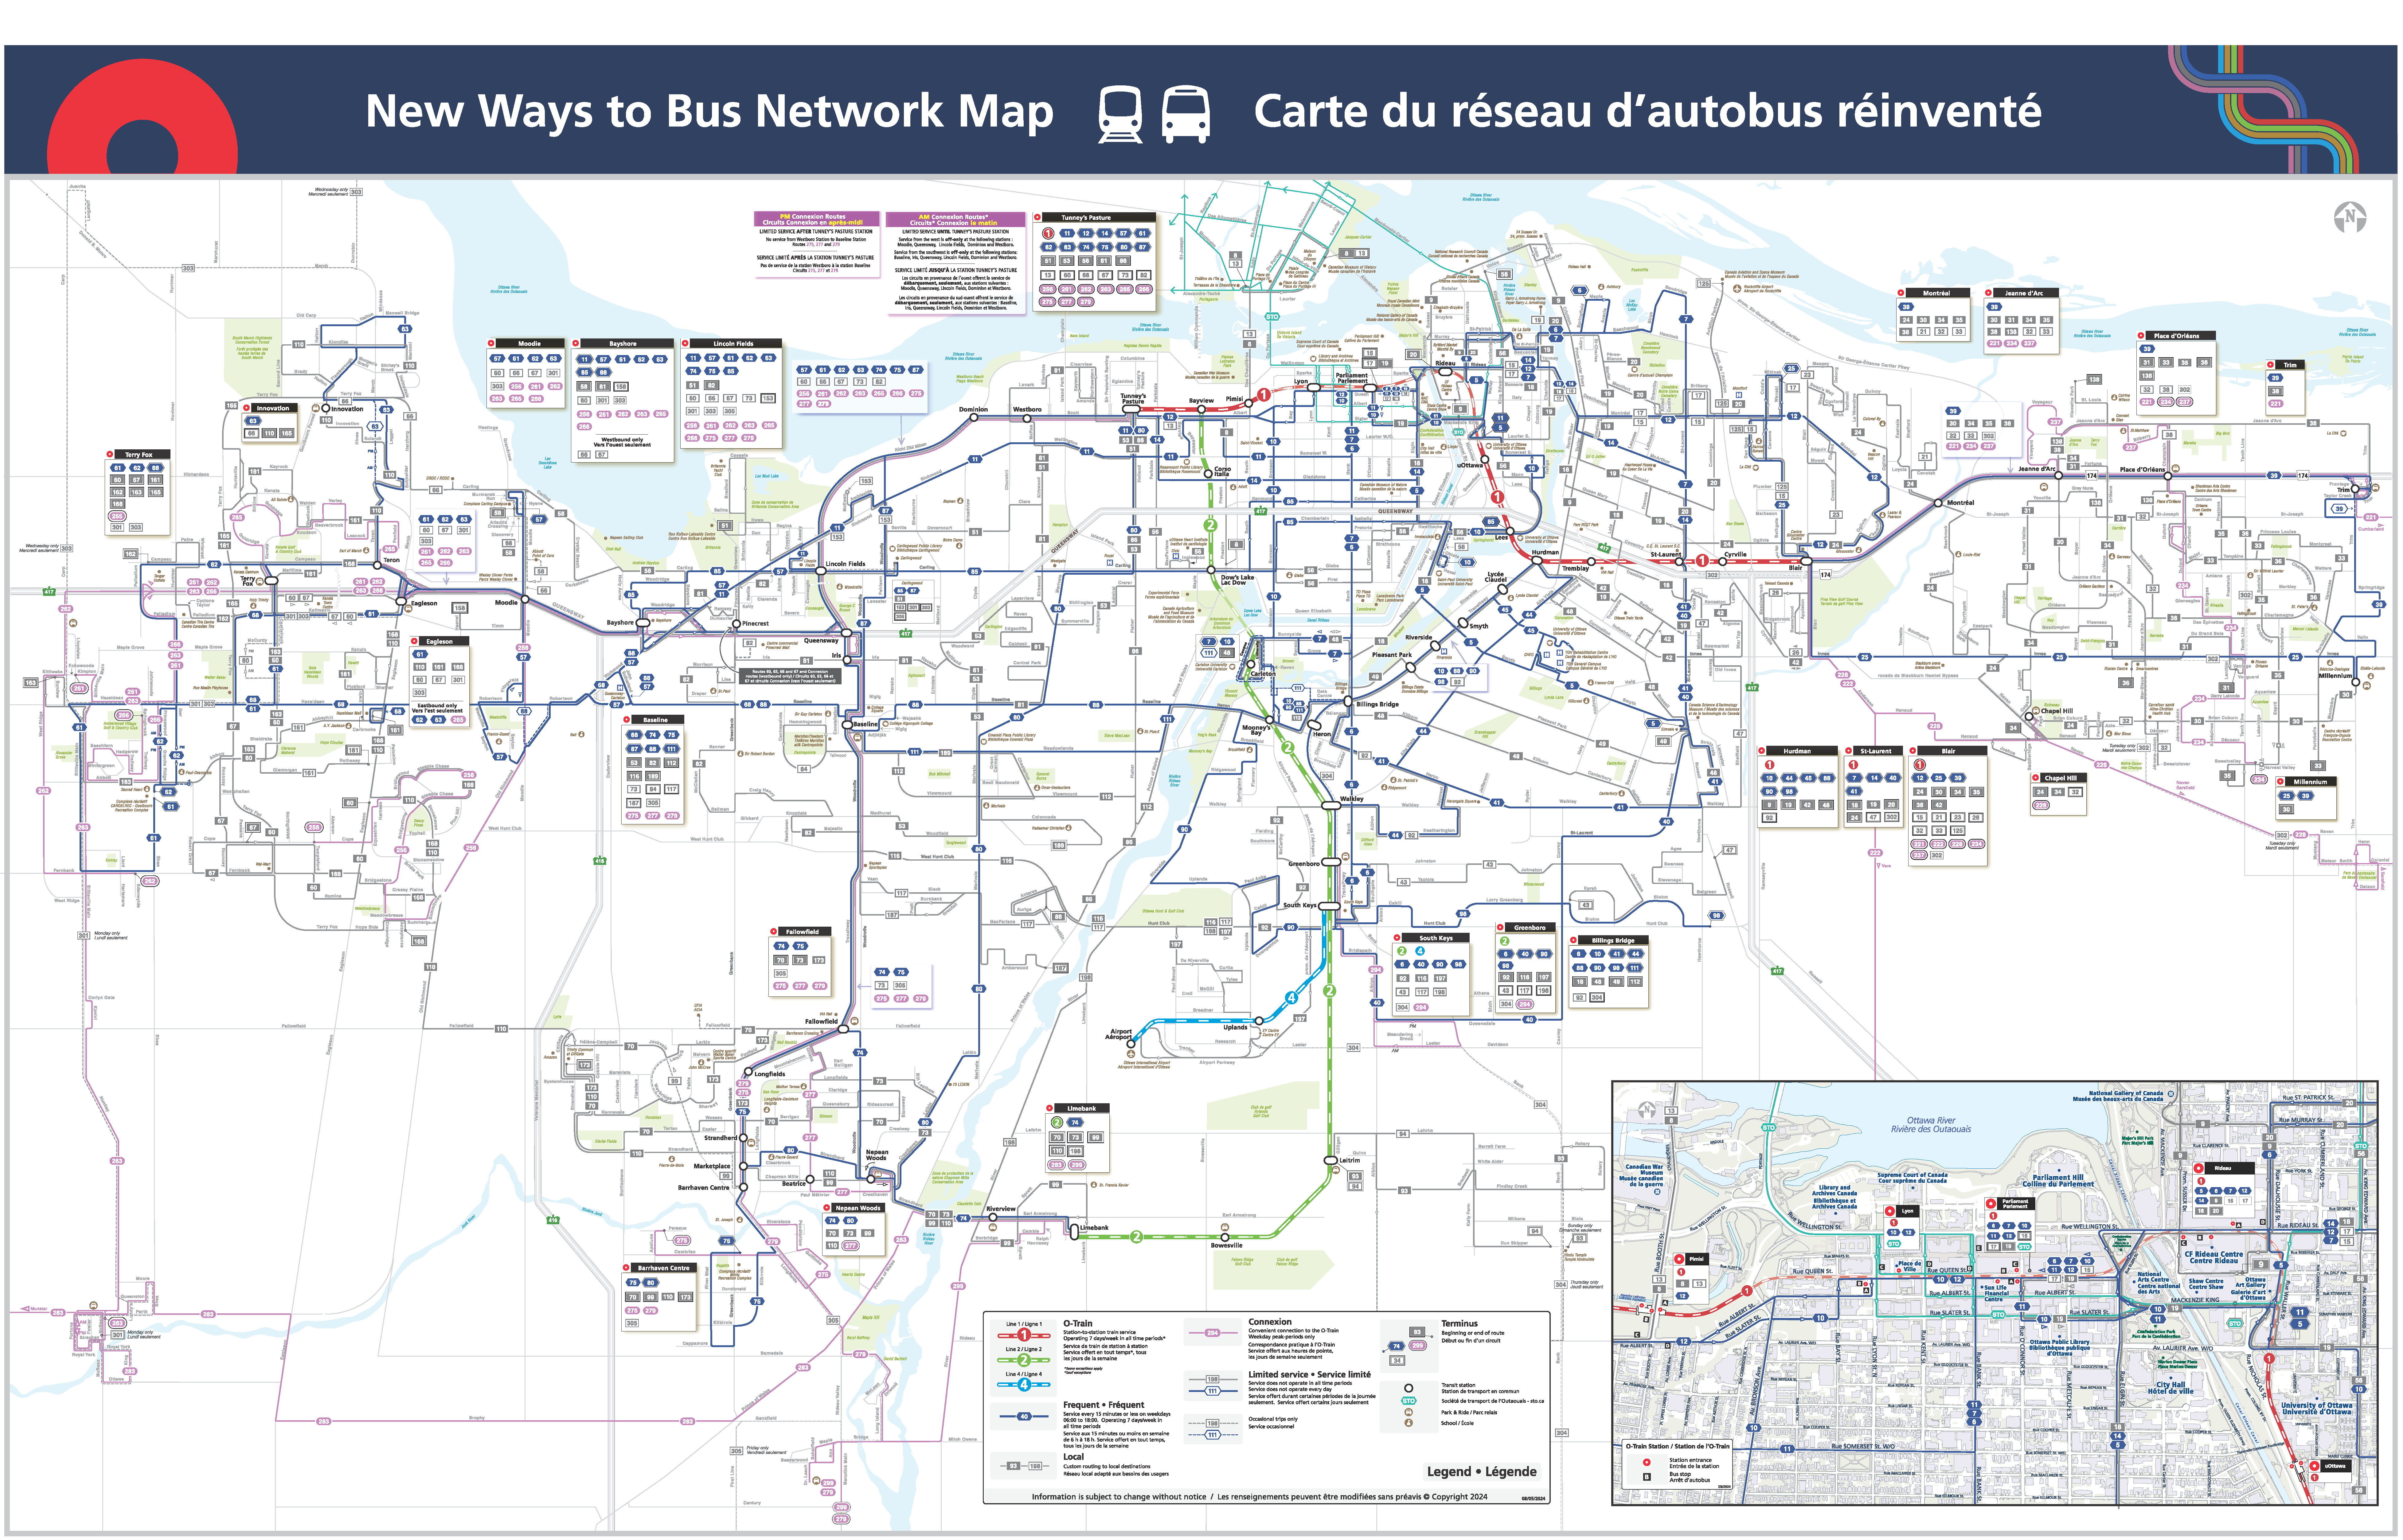 New Ways to Bus Network map